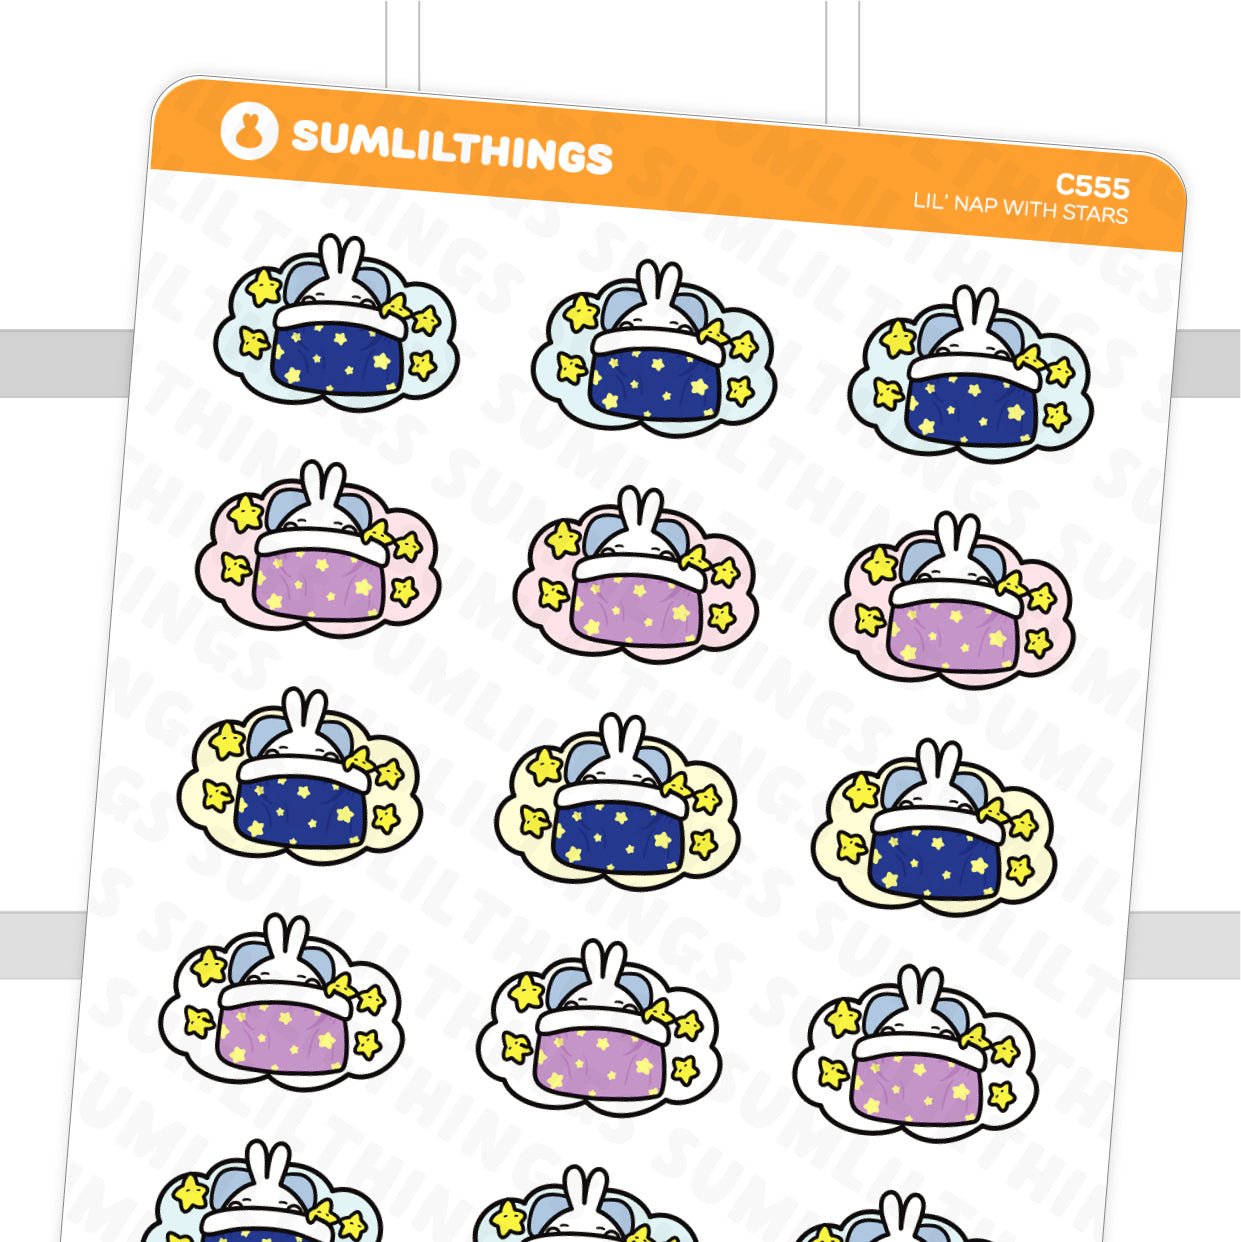 Lil' Nap with Stars Stickers - SumLilThings